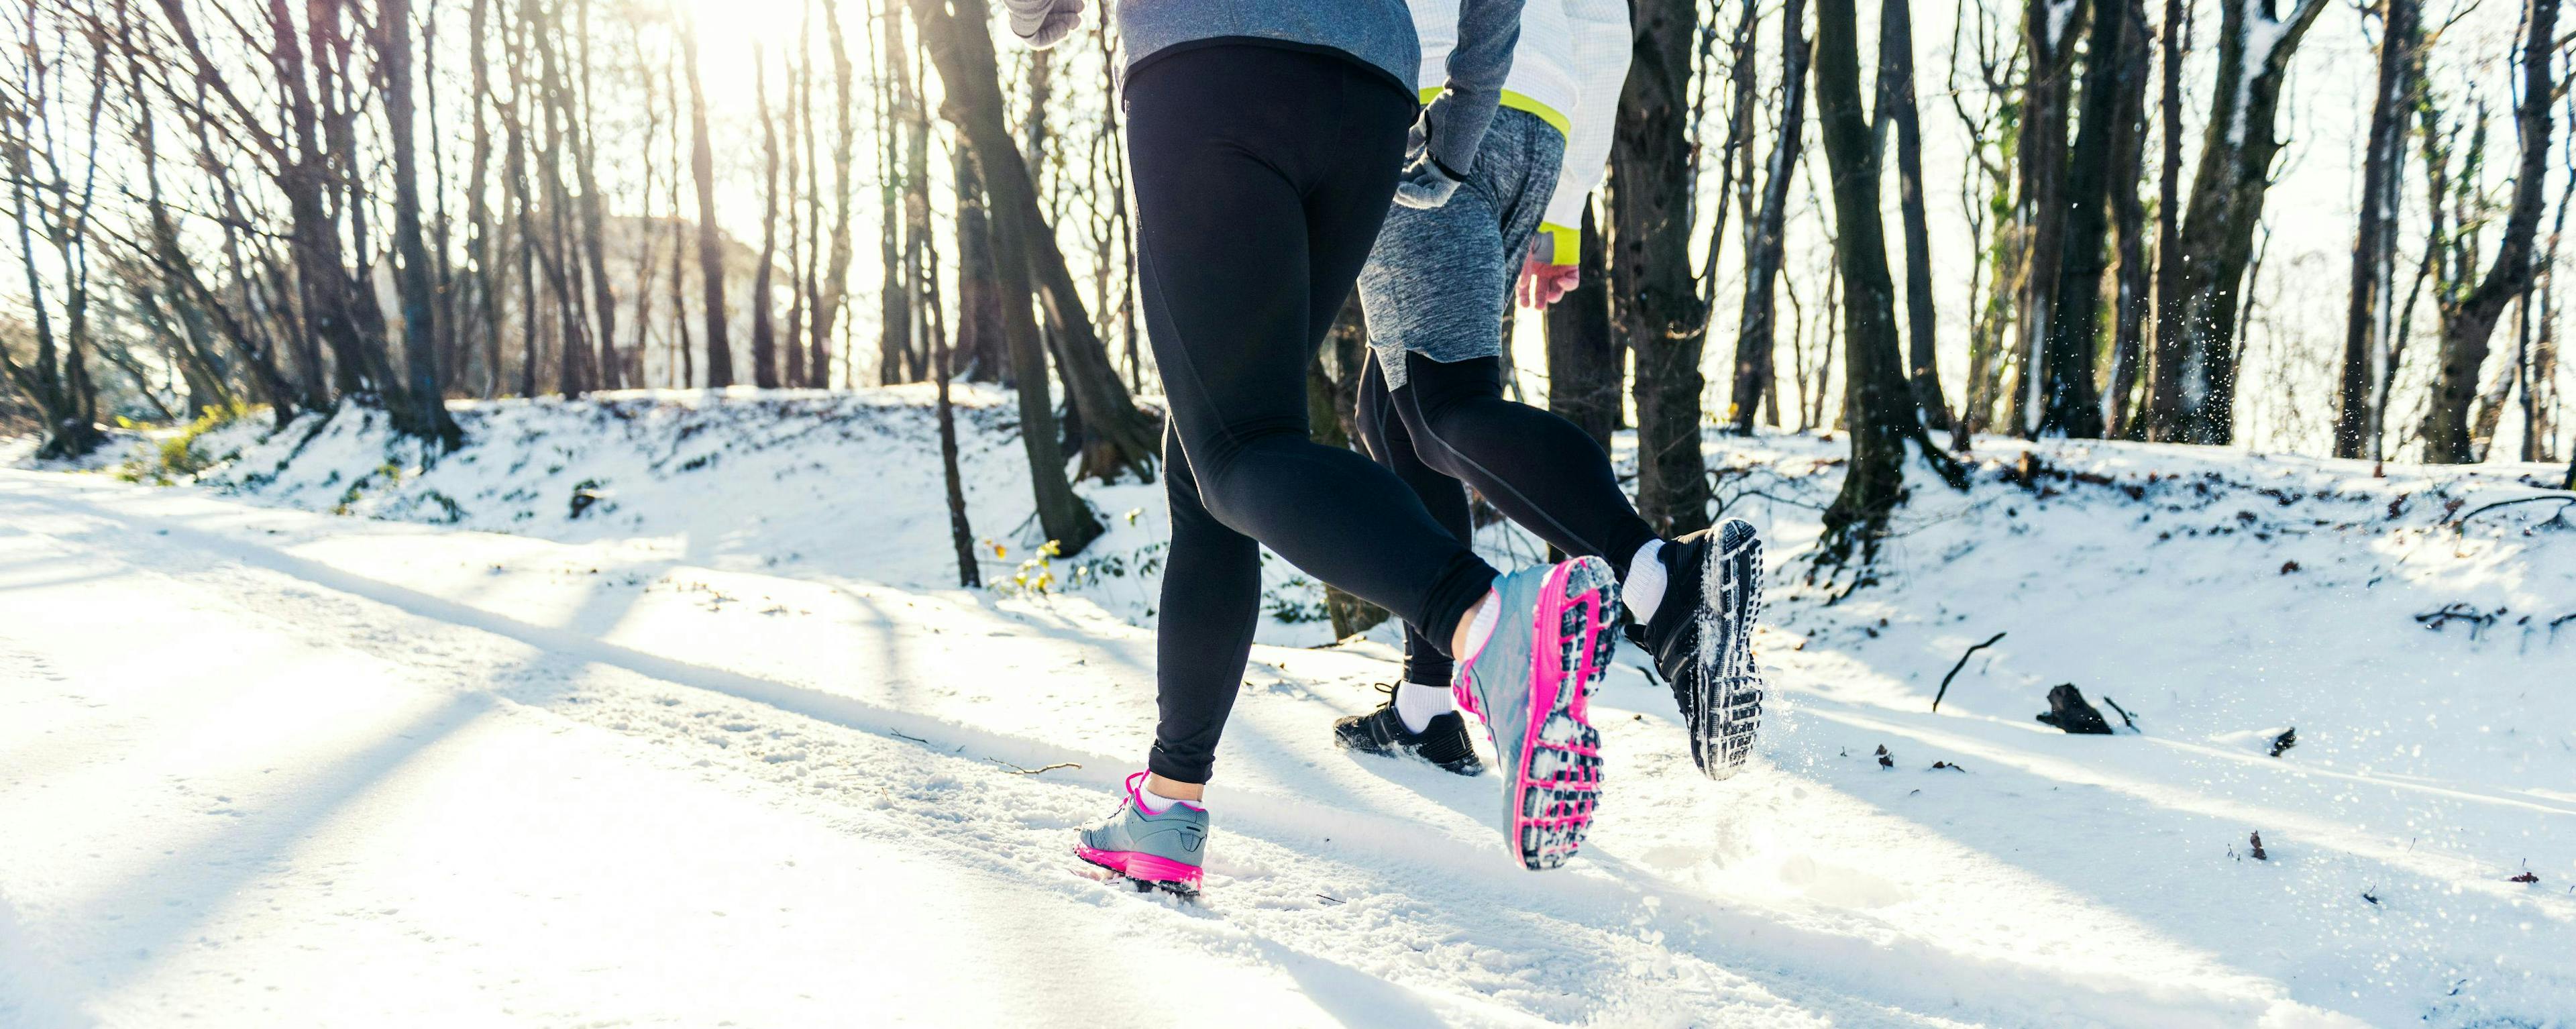 How to start winter running: tips and gear